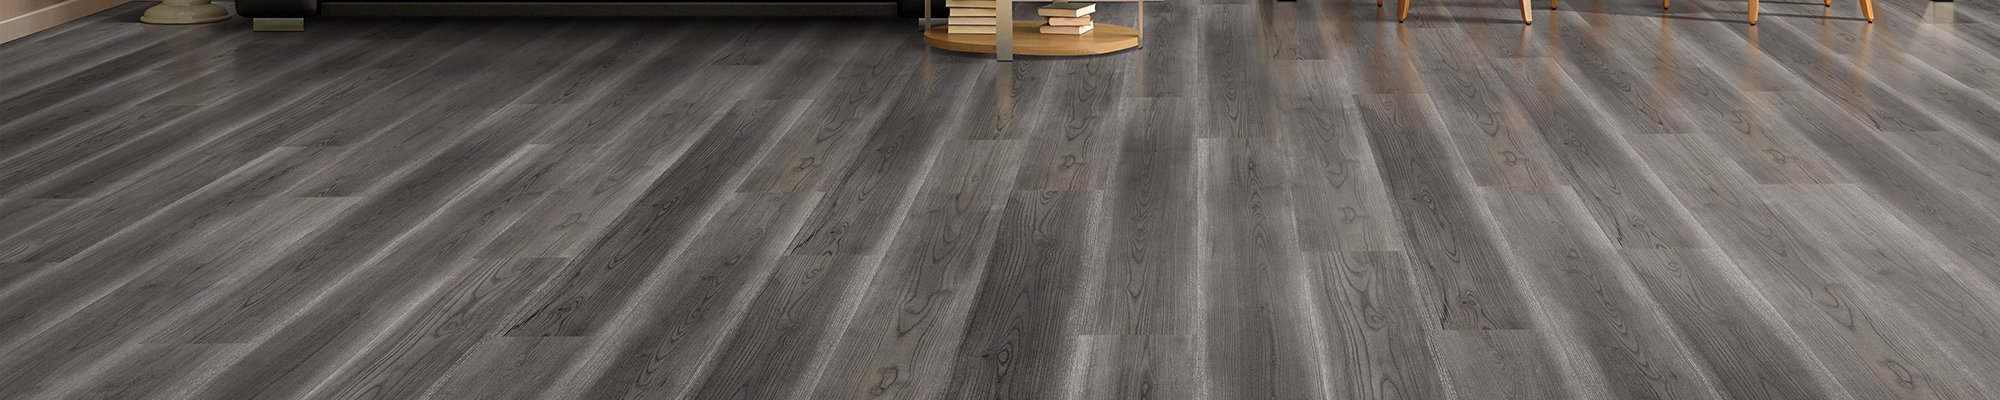 Laminate Flooring Info Lonsdale Flooring in North Vancouver